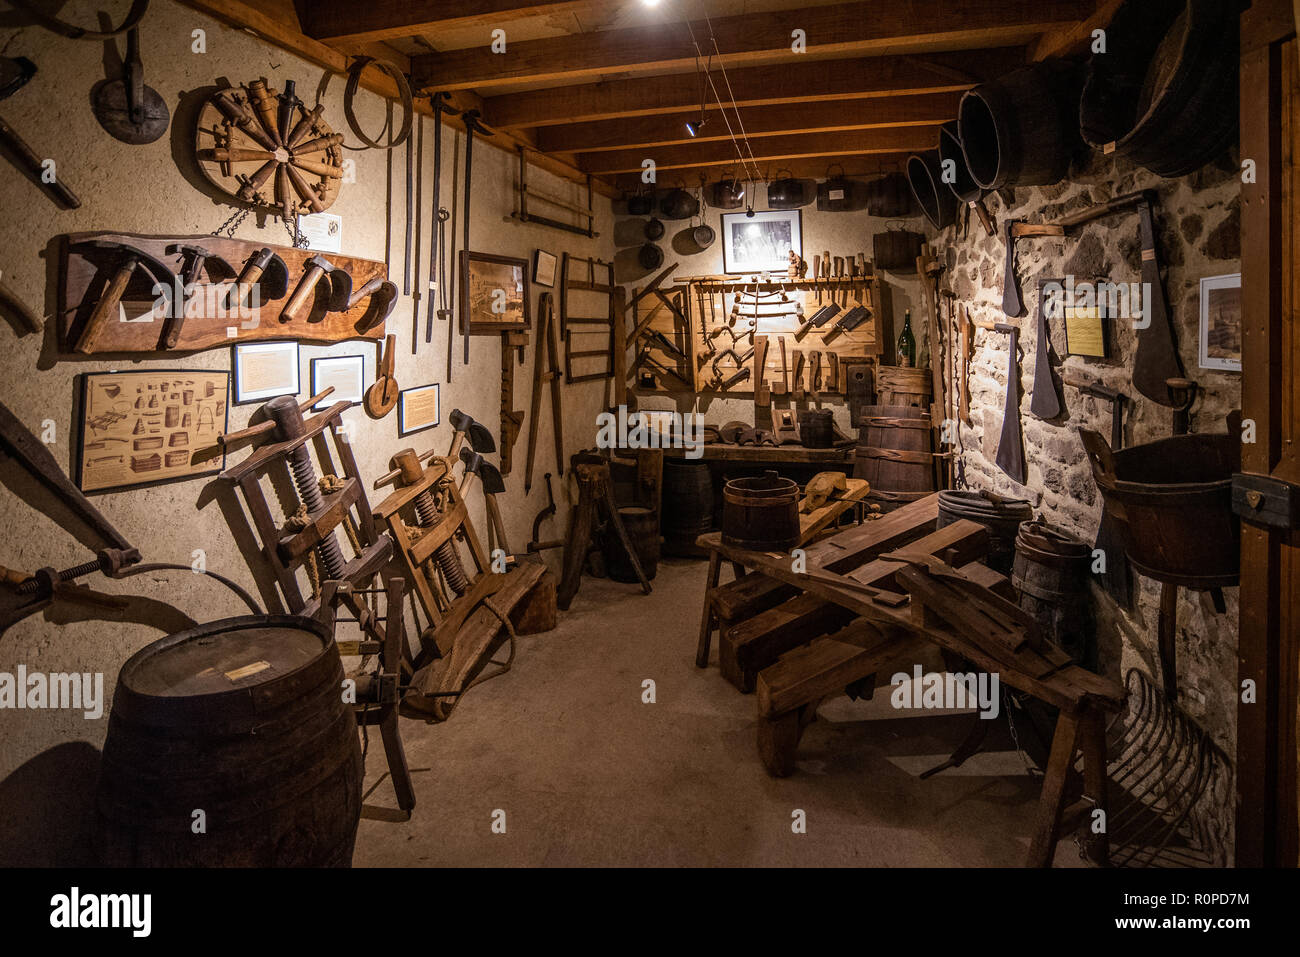 A wine museum in the Beaujolais wine growing region of France Stock Photo